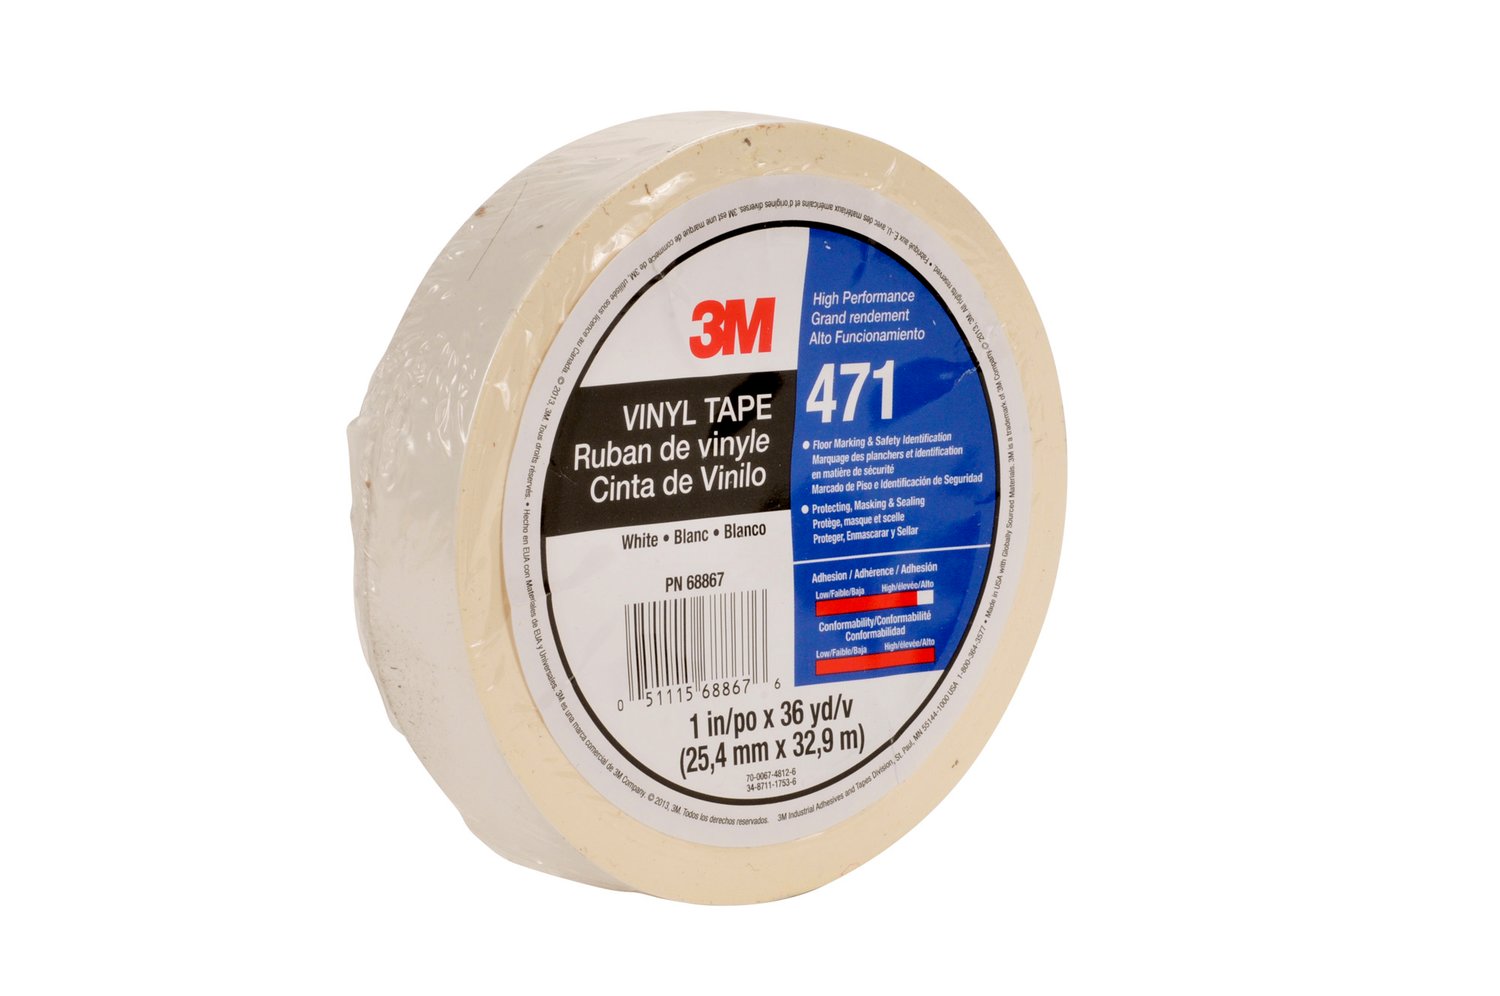 7100044647 - 3M Vinyl Tape 471, White, 1/2 in x 36 yd, 5.2 mil, 72 rolls per case,
Individually Wrapped Conveniently Packaged